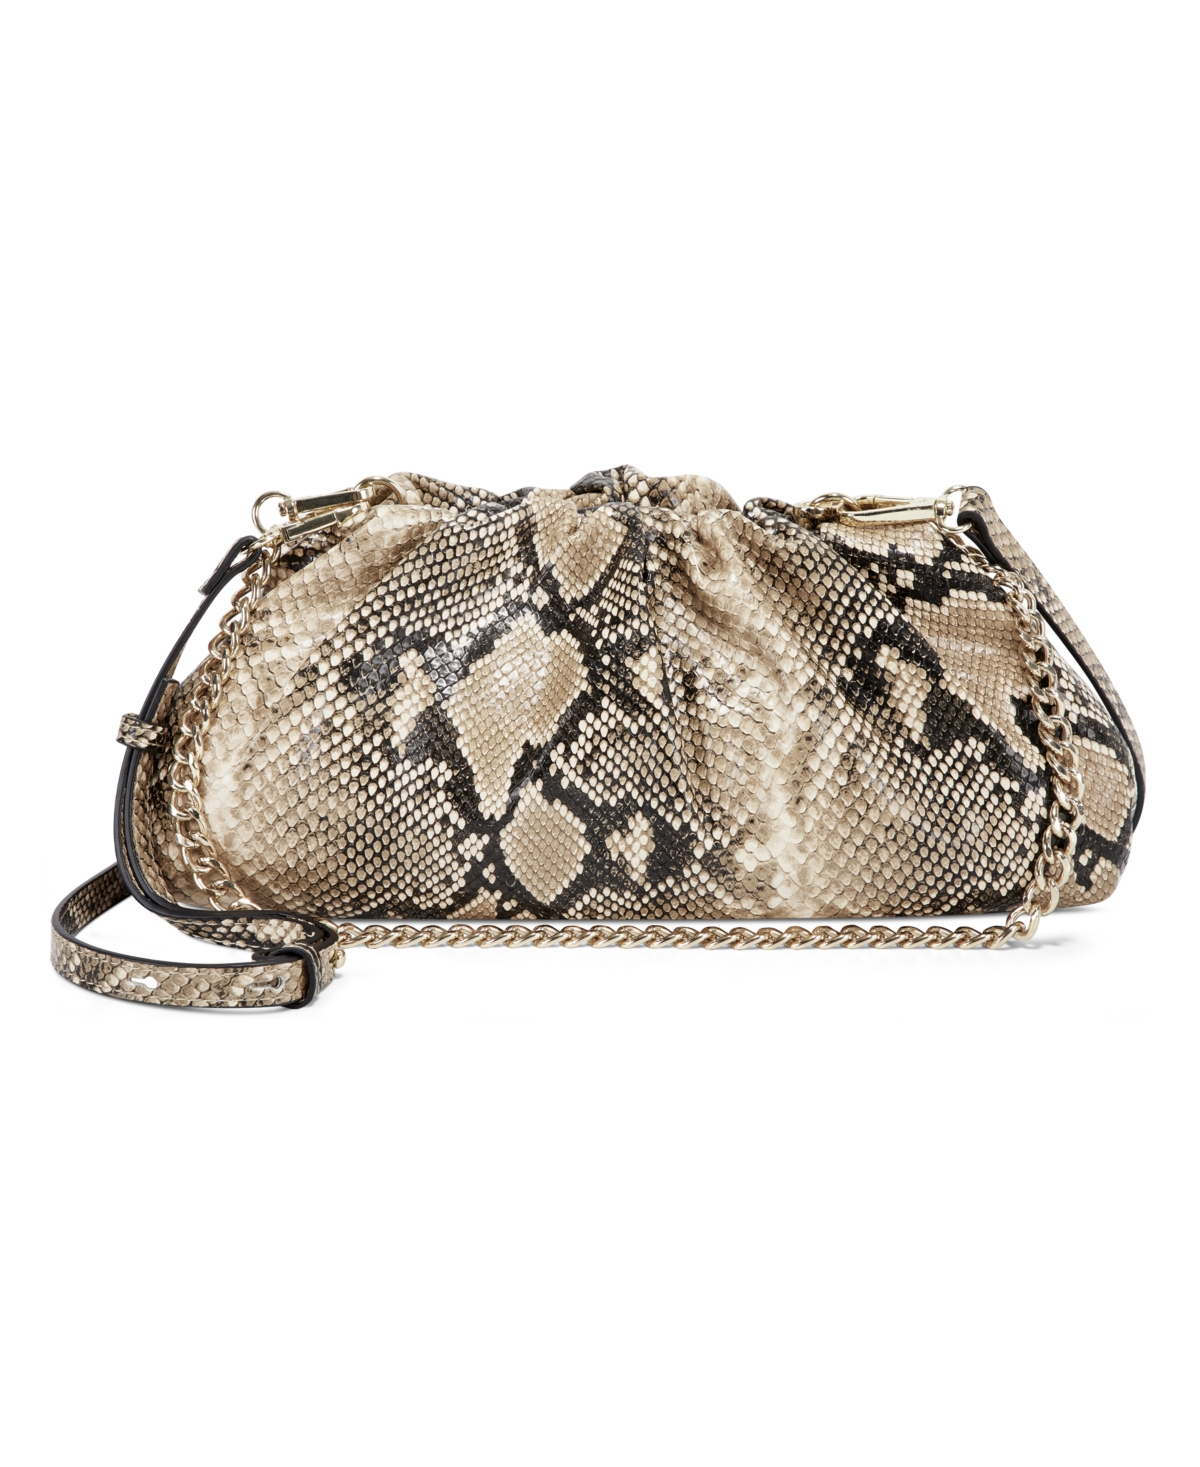 Inc International Concepts Kj Clutch, Created For Macy's In Neutral Snake,gold